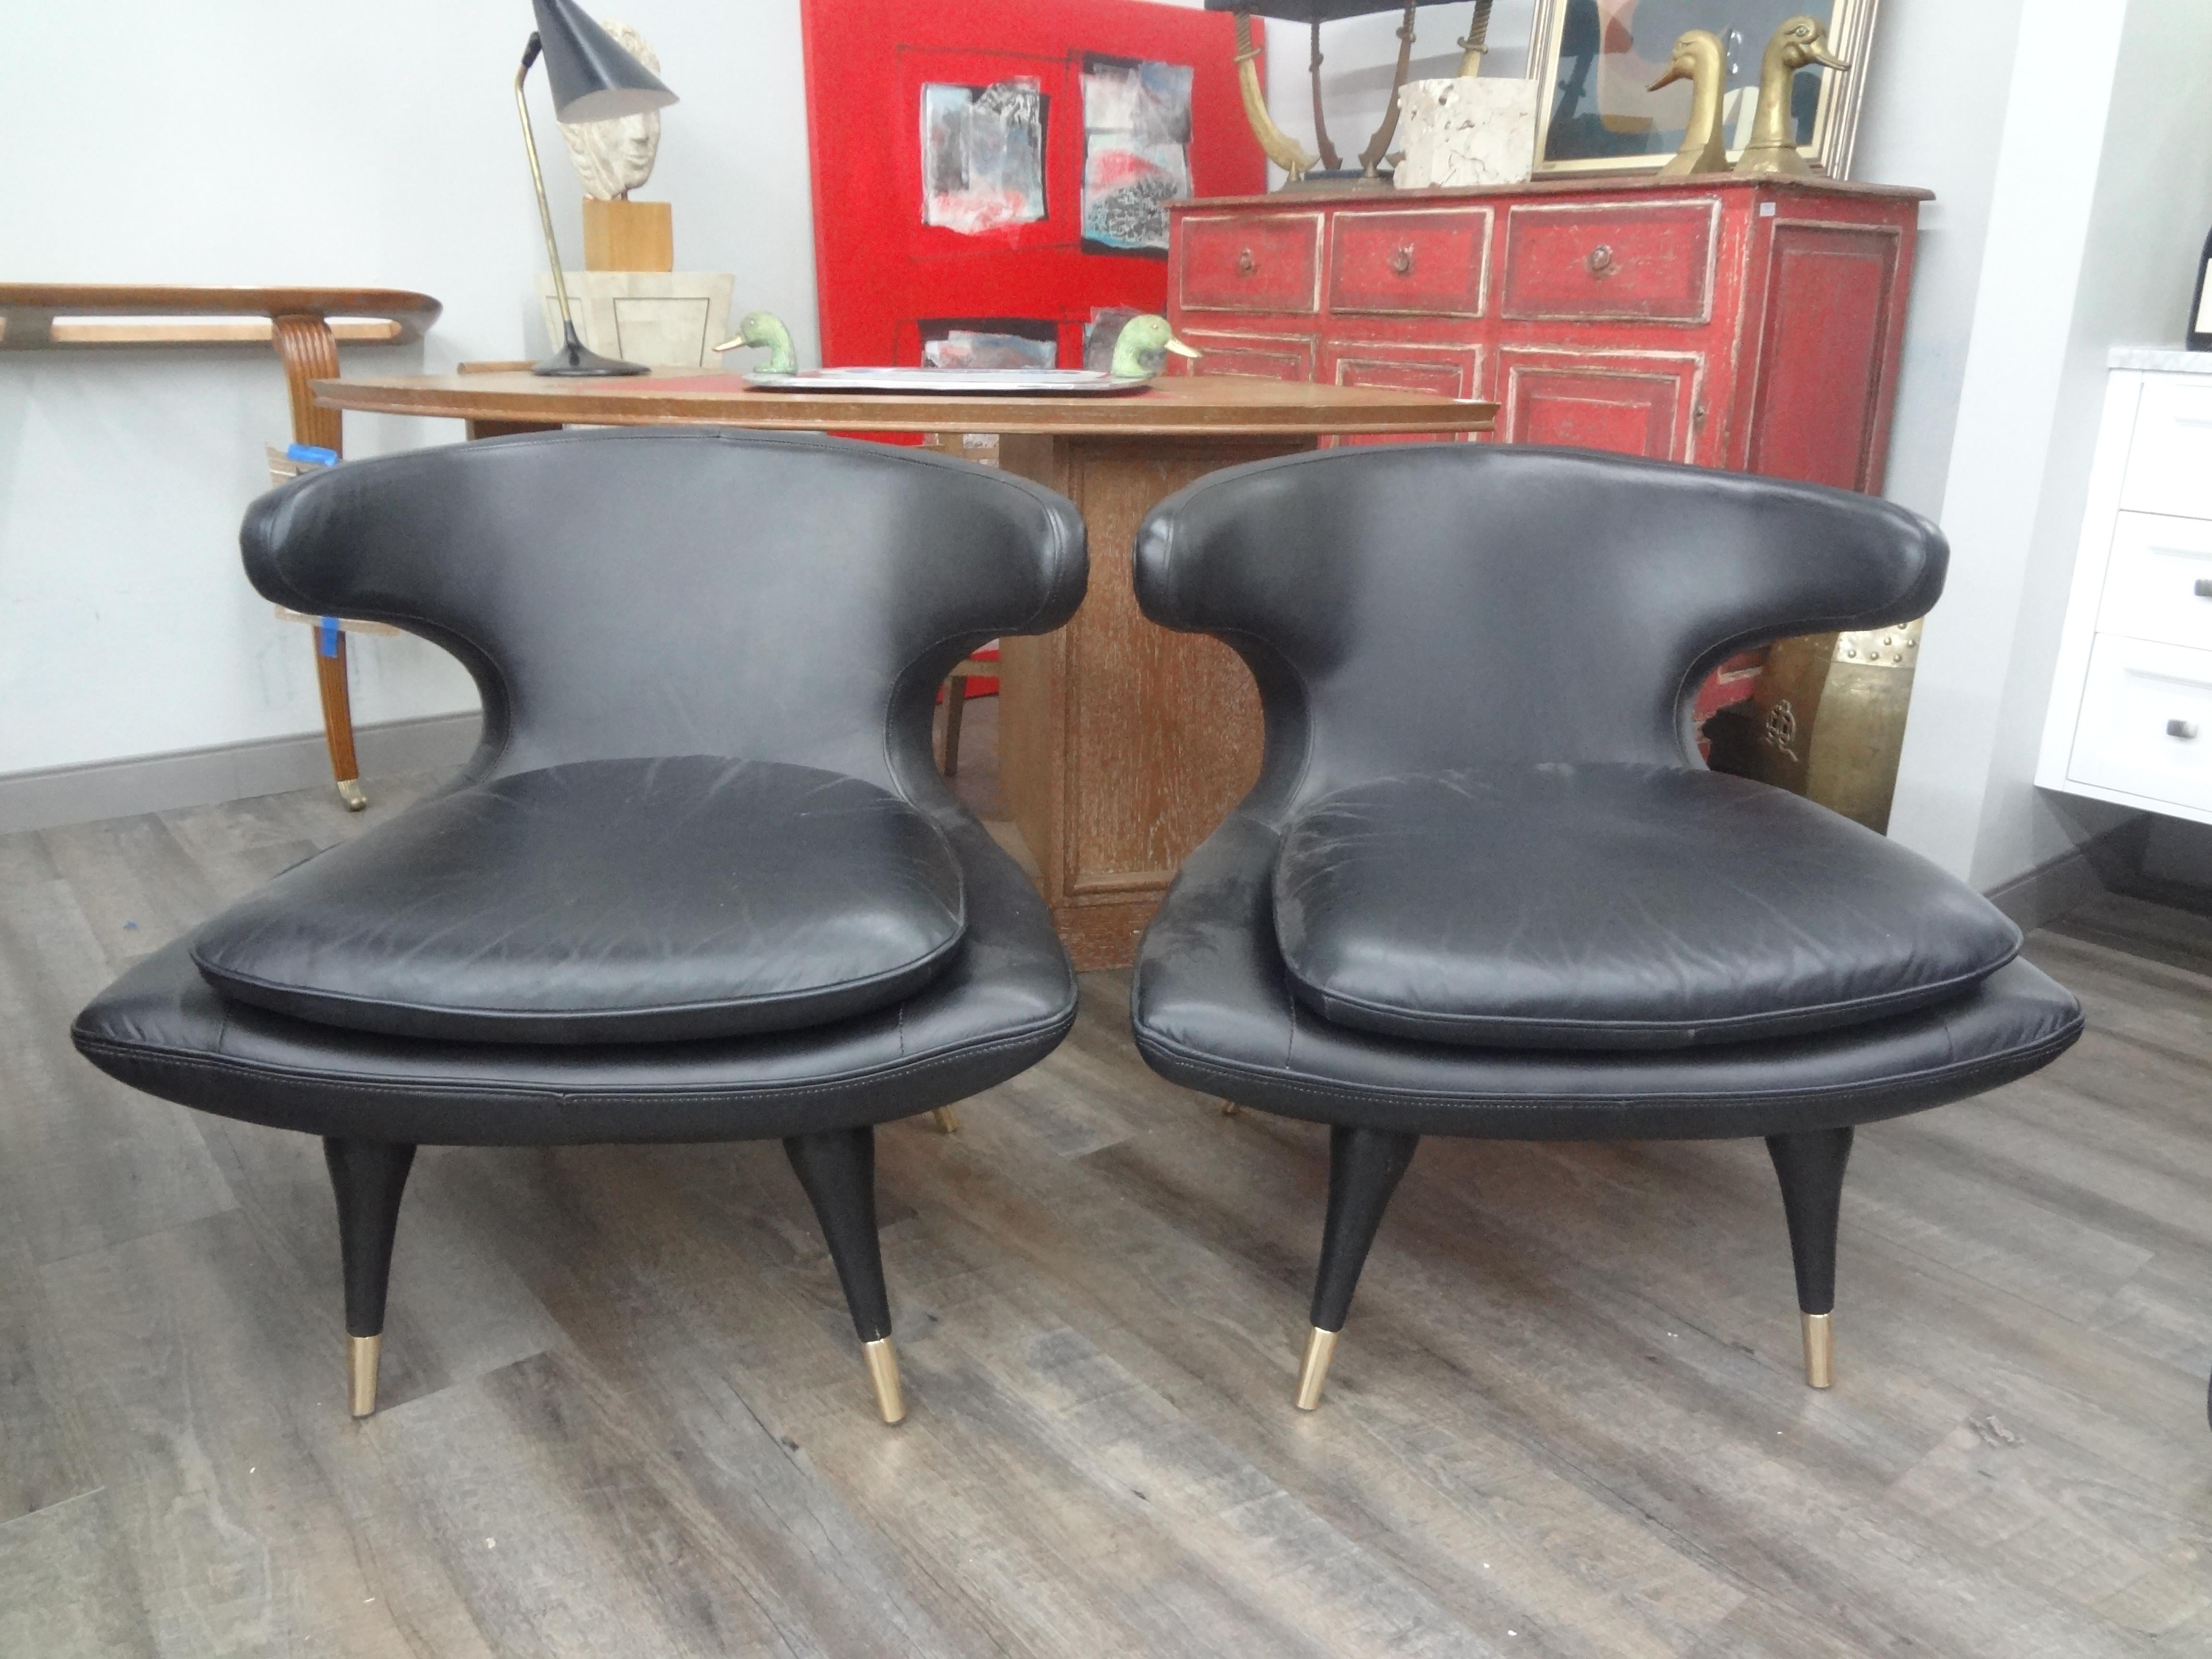 Pair of Italian Modern Curved Back Chairs Upholstered in Black Leather In Good Condition For Sale In Houston, TX